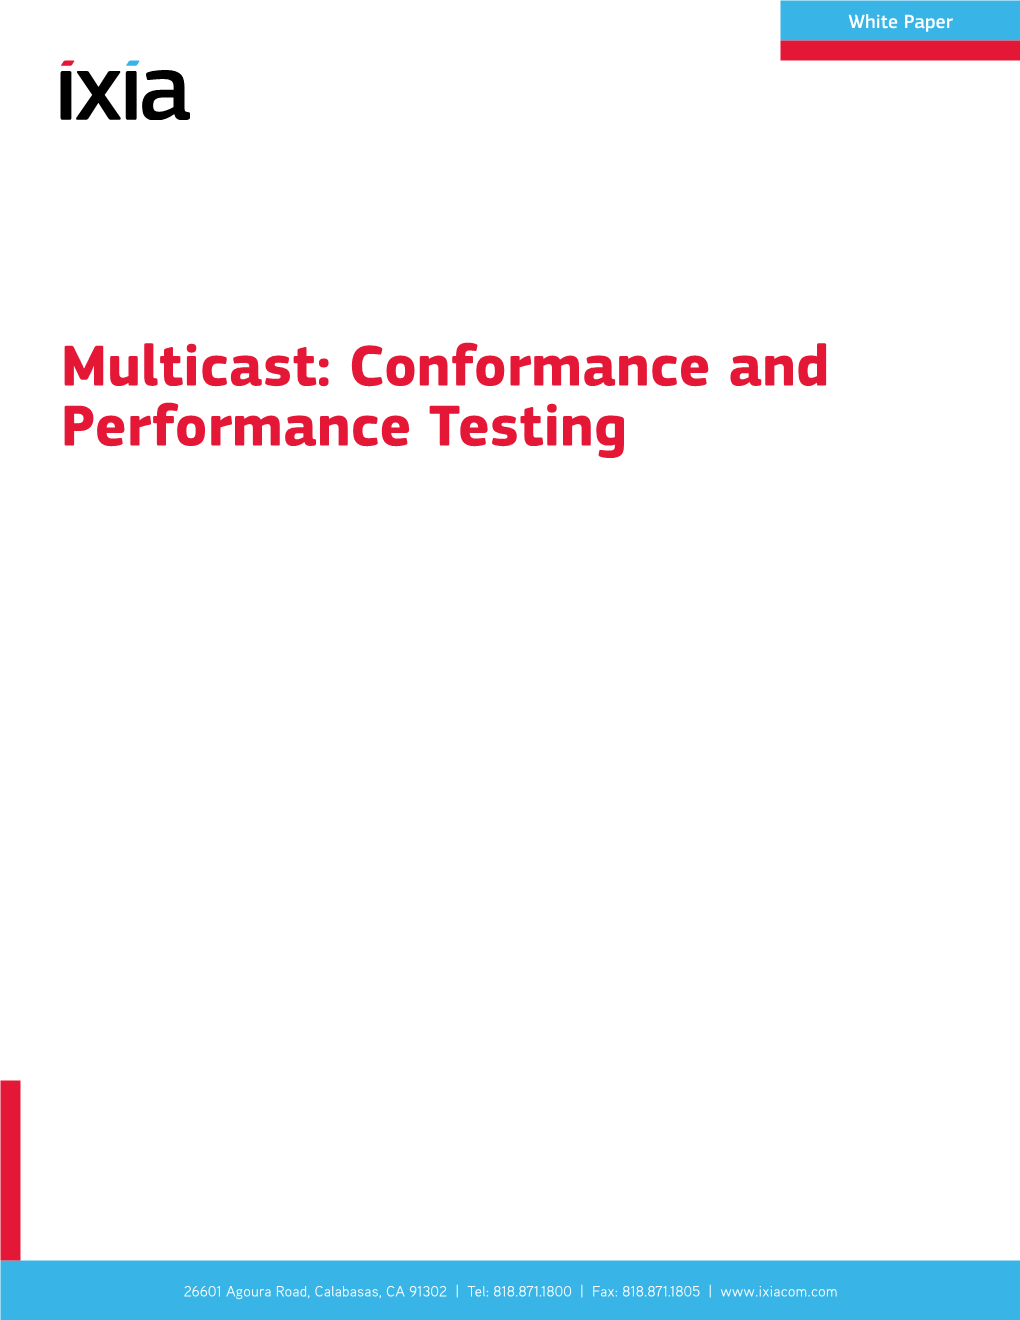 Multicast: Conformance and Performance Testing